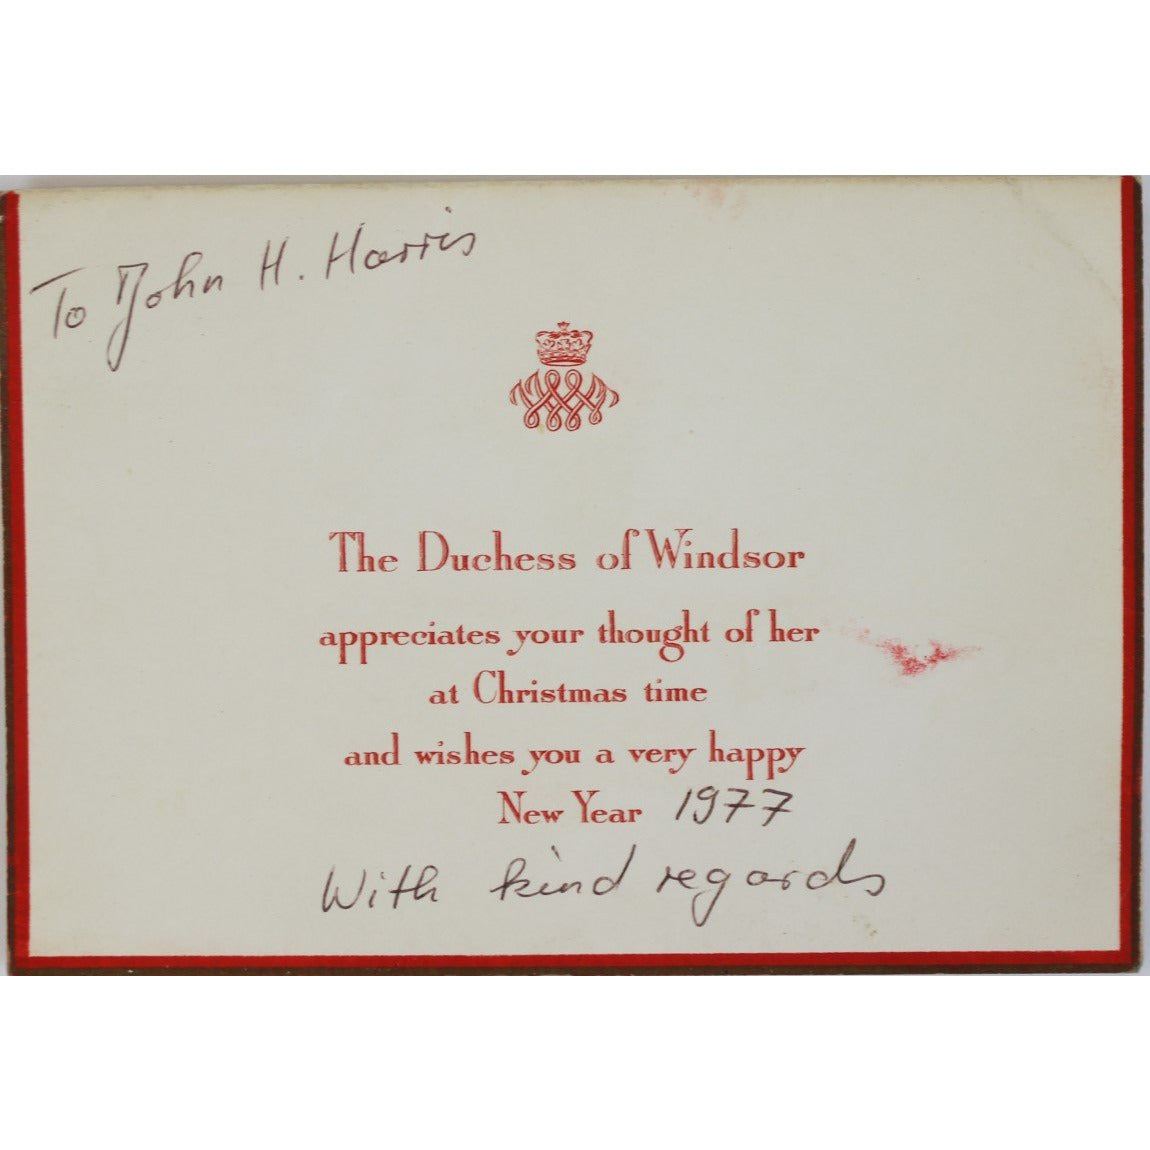 The Duchess of Windsor Wishes you a Merry Christmas and a Happy New Year Christmas Card